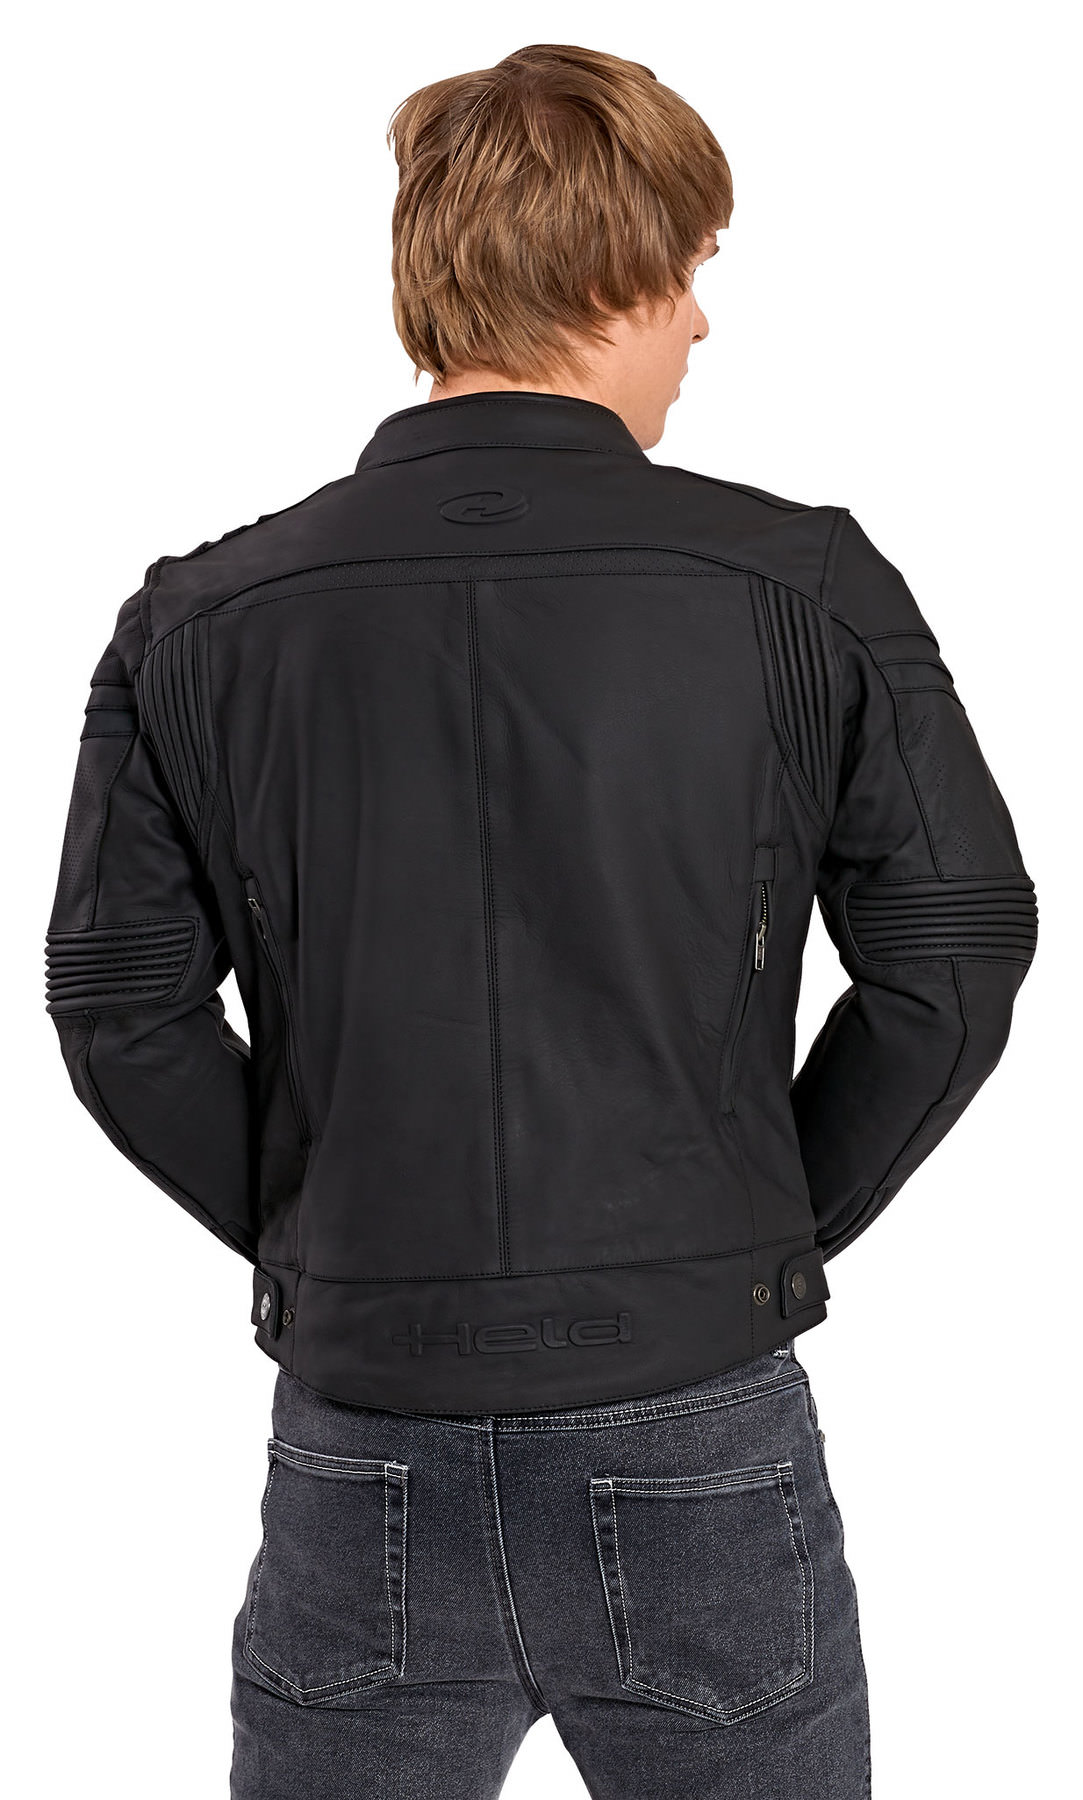 Buy Held Cosmo 3 5733 leather combi jacket | Louis motorcycle clothing and technology